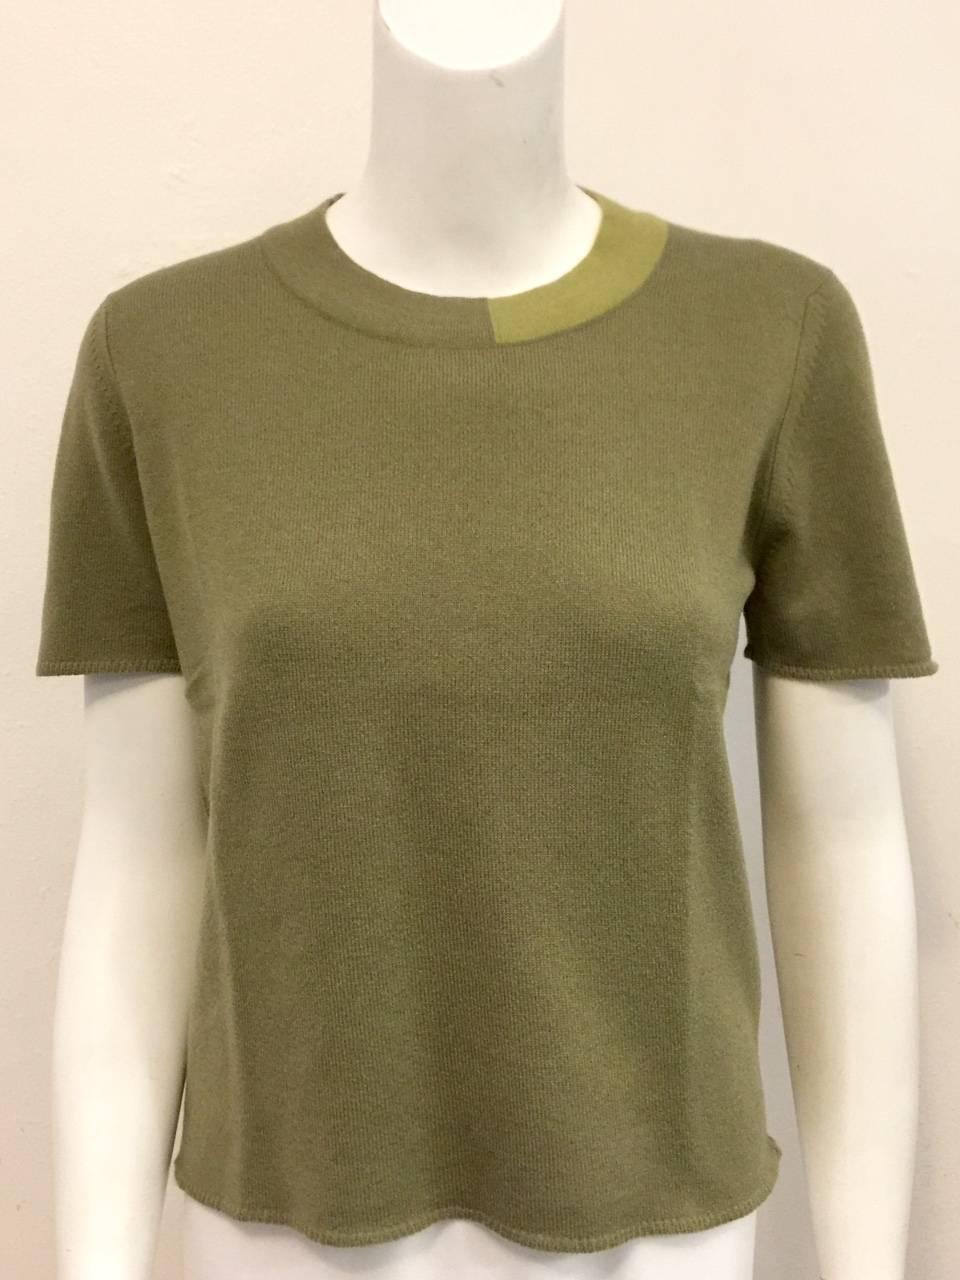 Gray Chanel Fall 1998 Olive Cashmere Twinset With Color Blocked Placket and Collar 40 For Sale